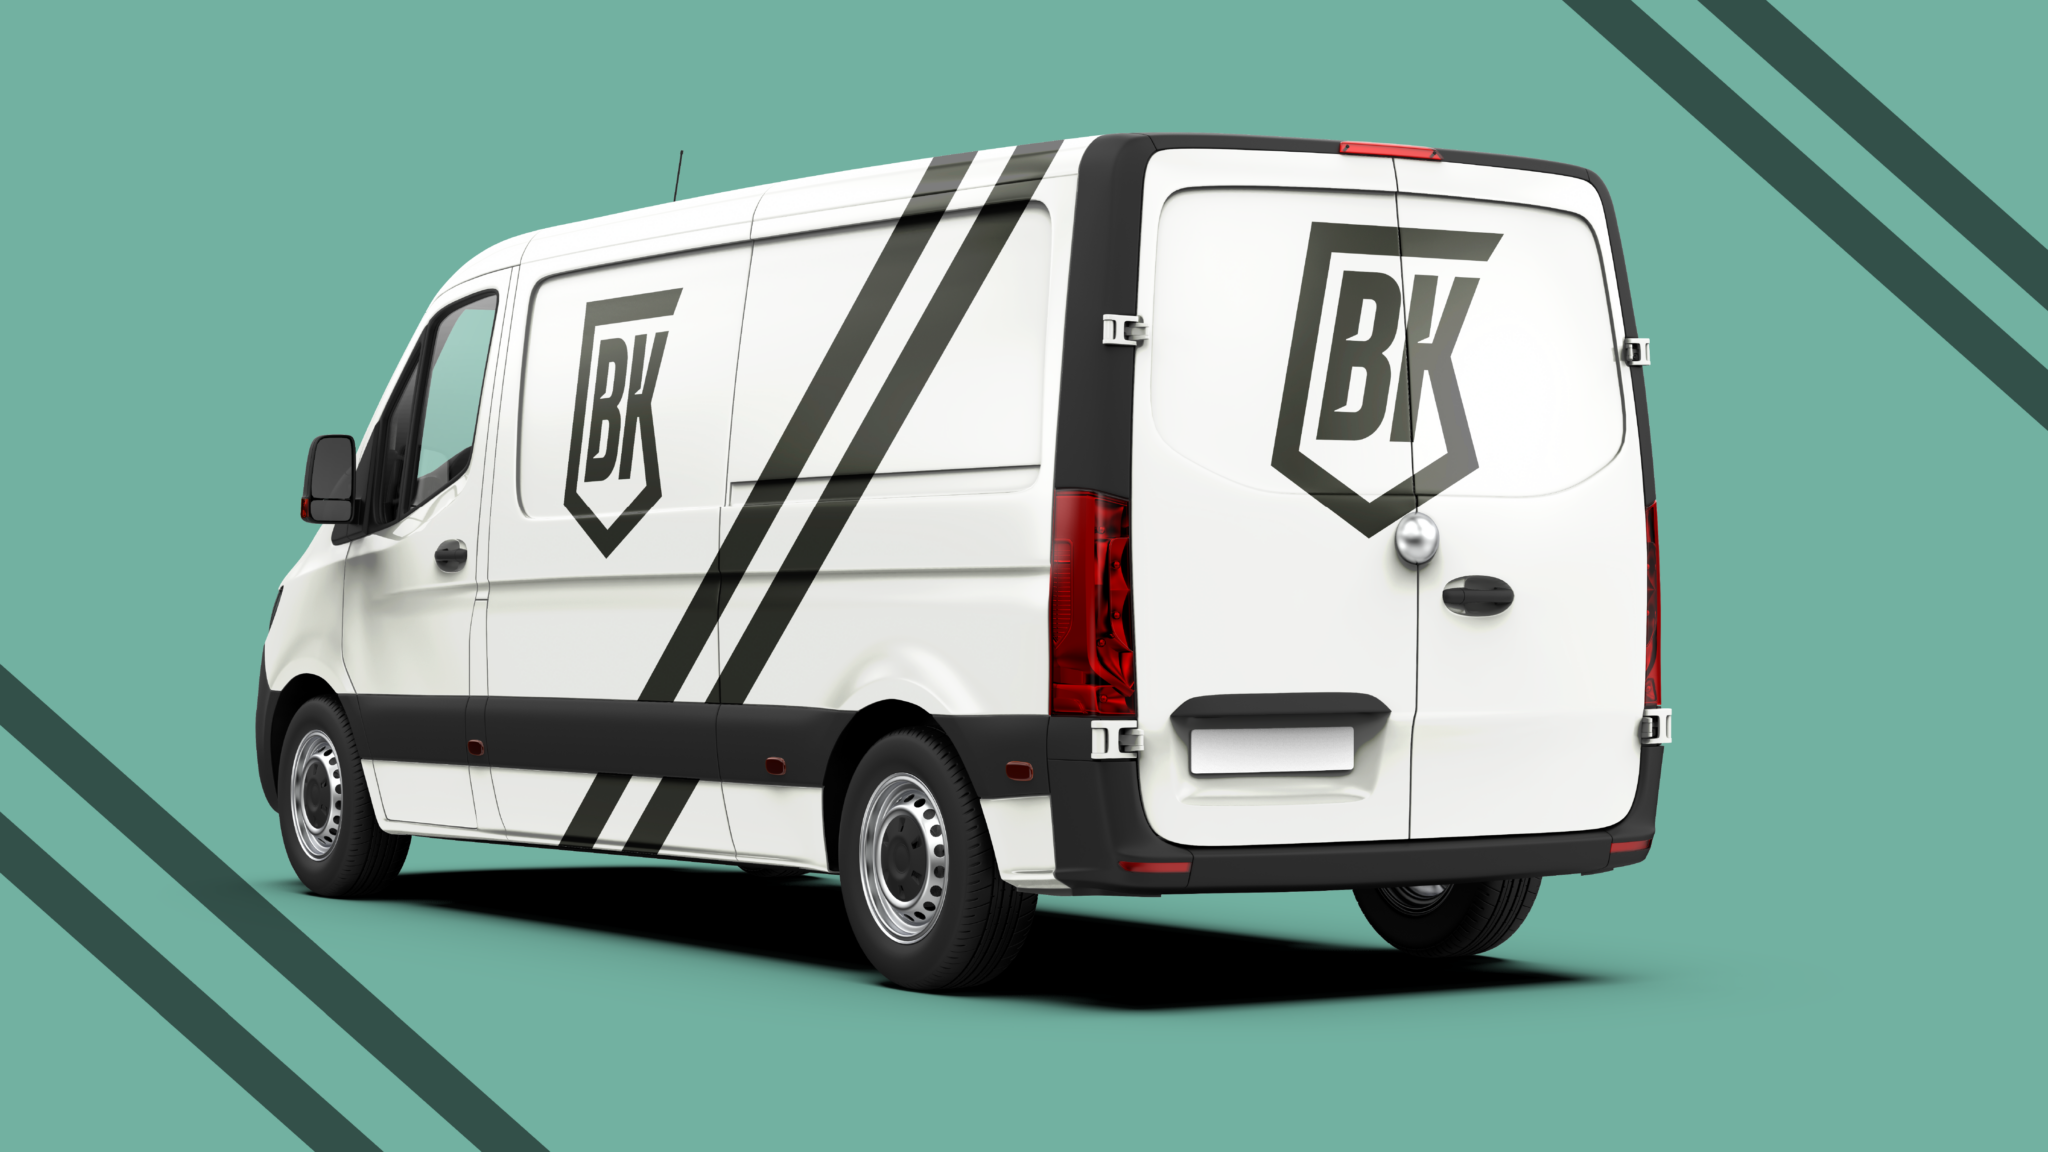 BK Vehicle Protection Systems